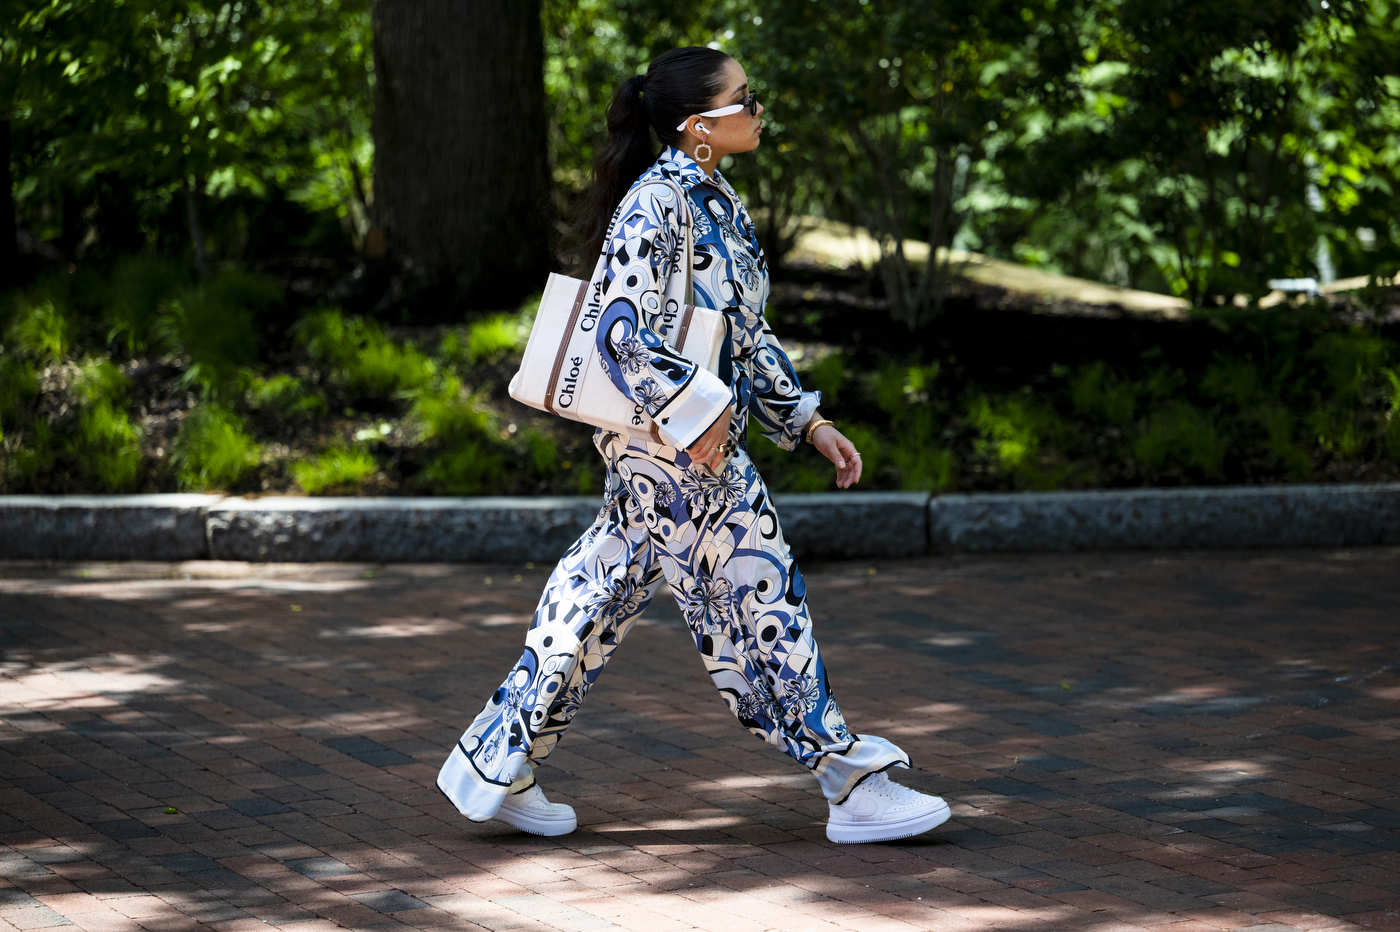 A person wearing a patterned white, blue, and black jumpsuit walks through a park on a sunny day.